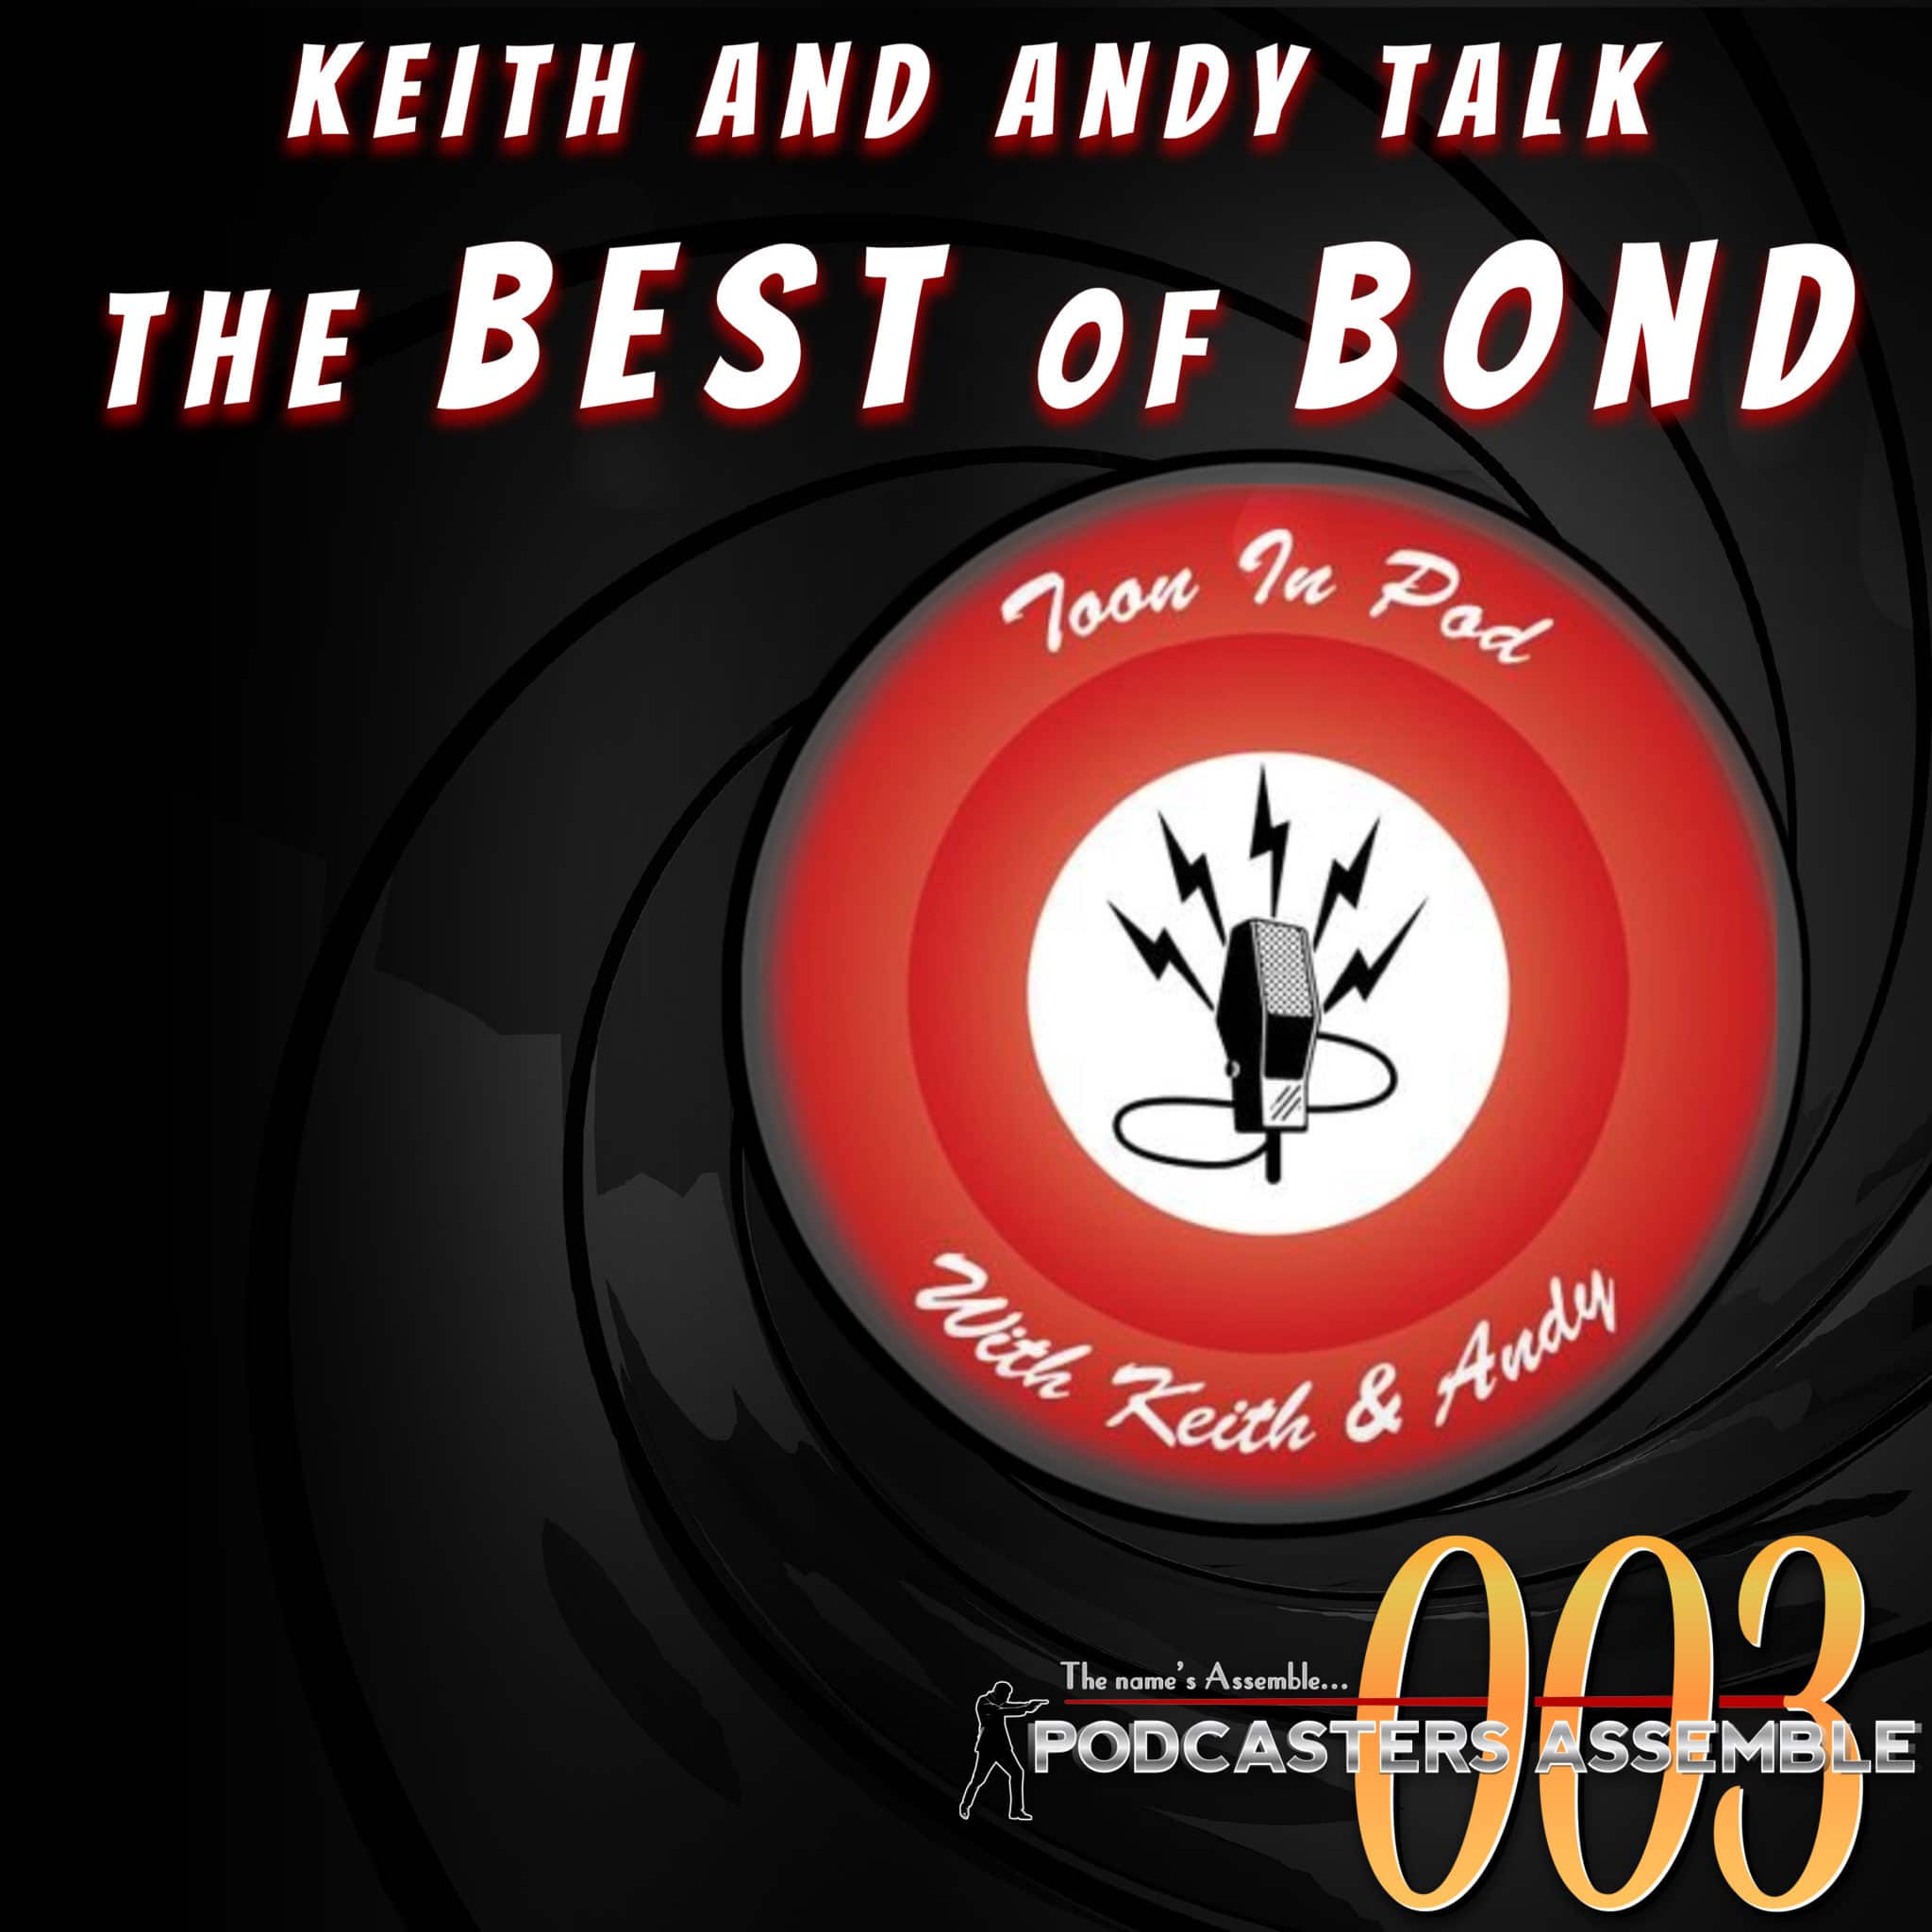 Bonus! Keith and Andy from Toon In Pod talk about The Best of Bond!